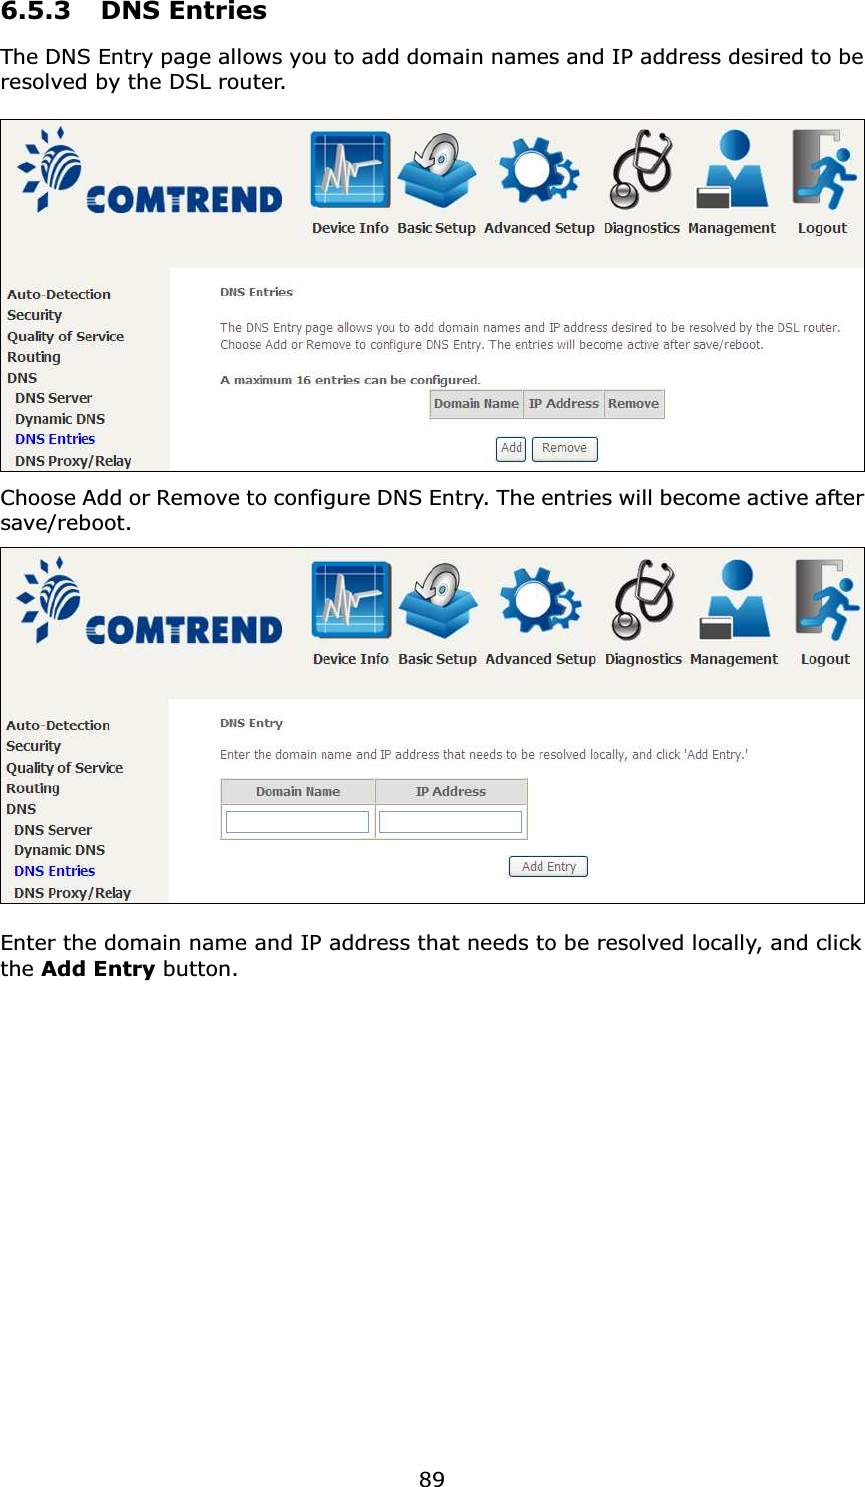  896.5.3   DNS Entries The DNS Entry page allows you to add domain names and IP address desired to be resolved by the DSL router.     Choose Add or Remove to configure DNS Entry. The entries will become active after save/reboot.   Enter the domain name and IP address that needs to be resolved locally, and click the Add Entry button.   